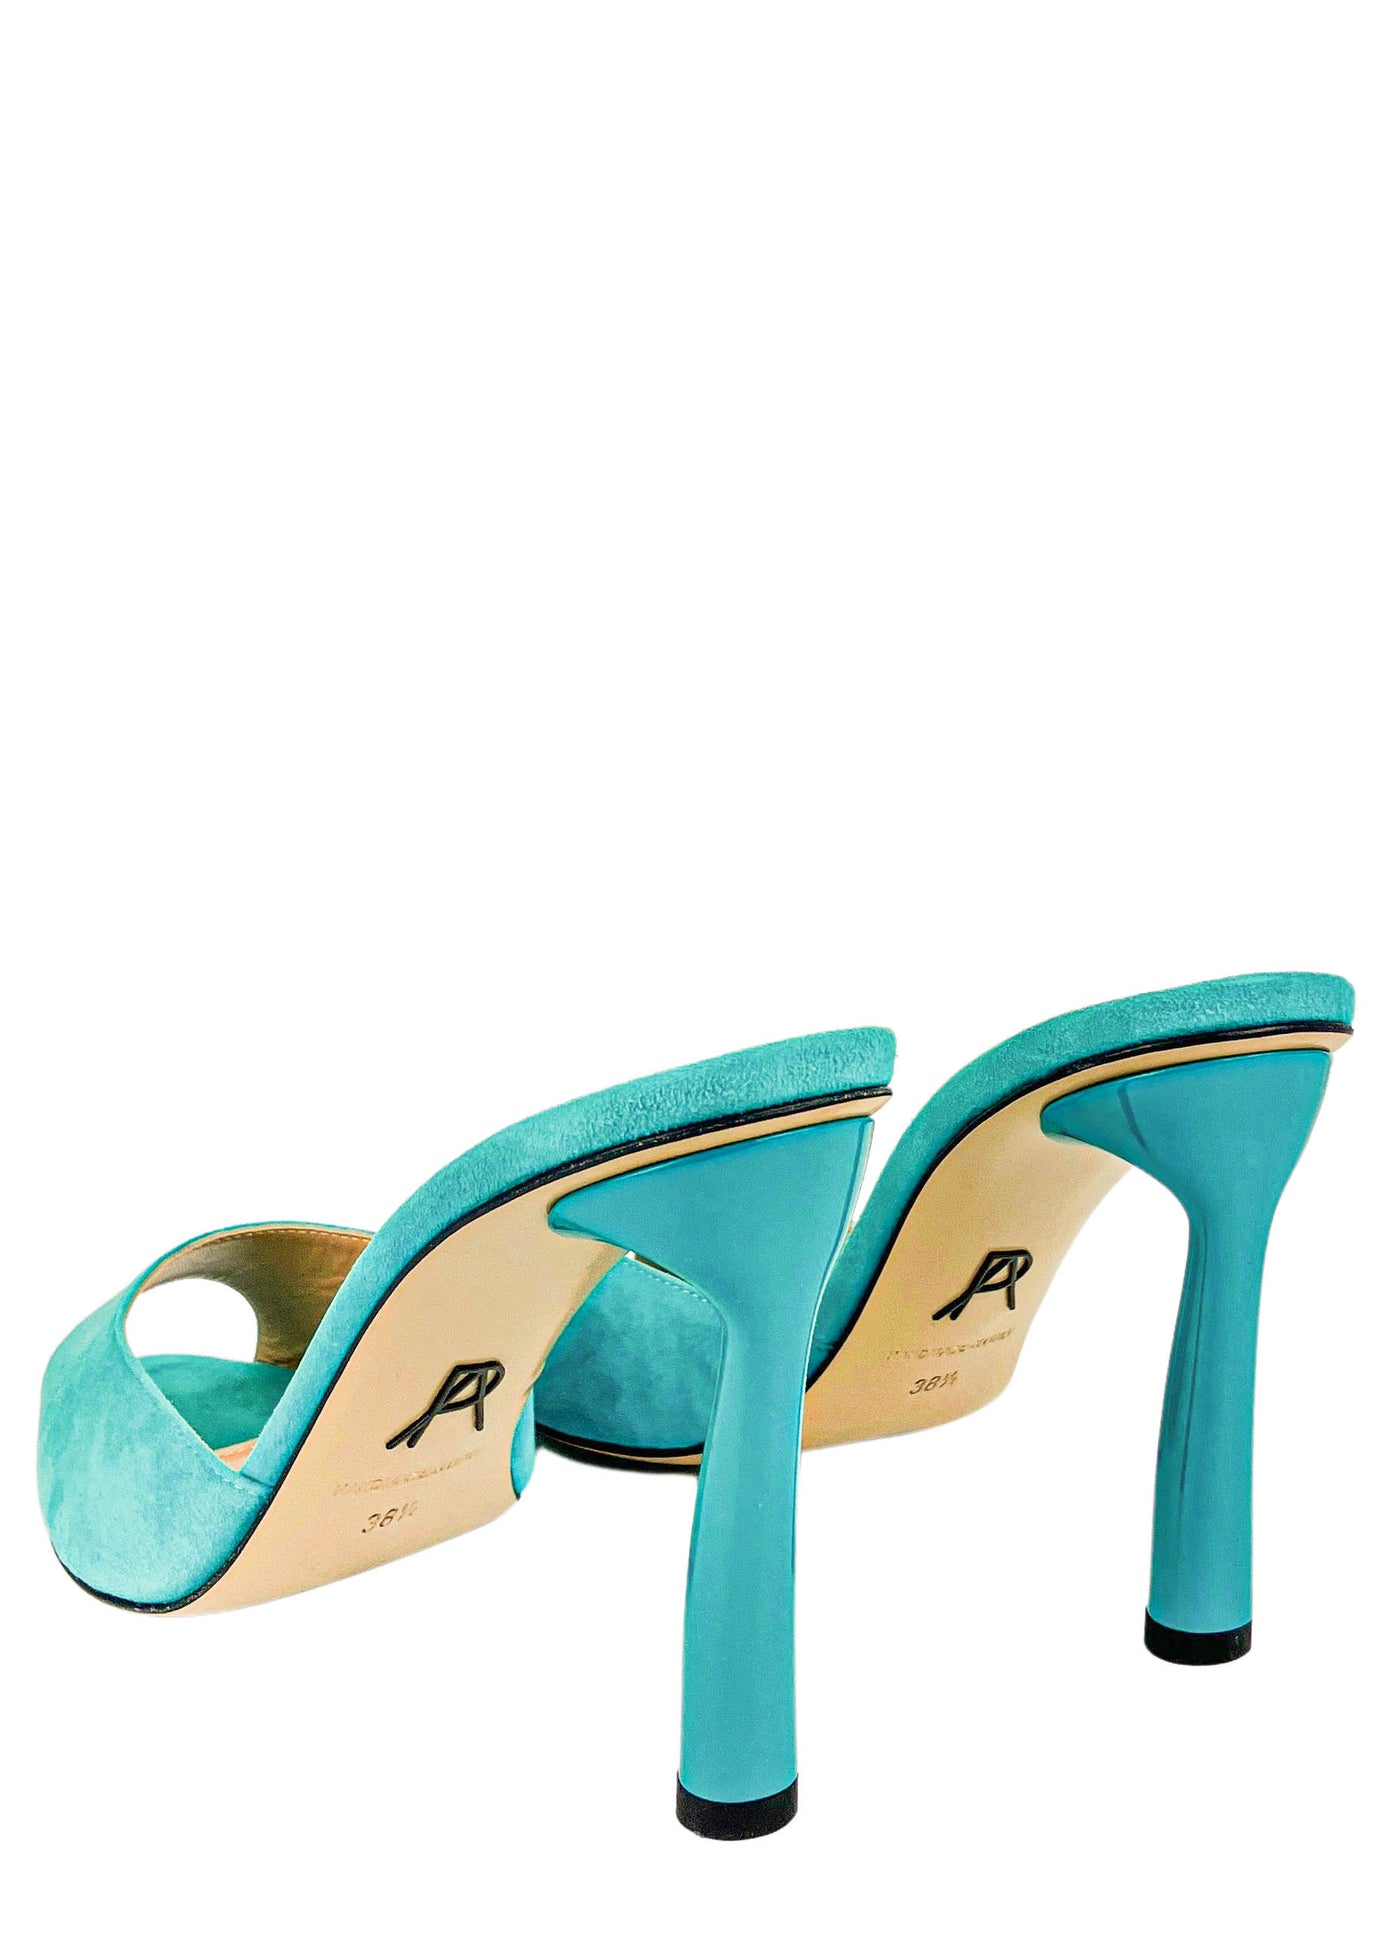 Paul Andrew Mules in Bright Teal - Discounts on Paul Andrew at UAL